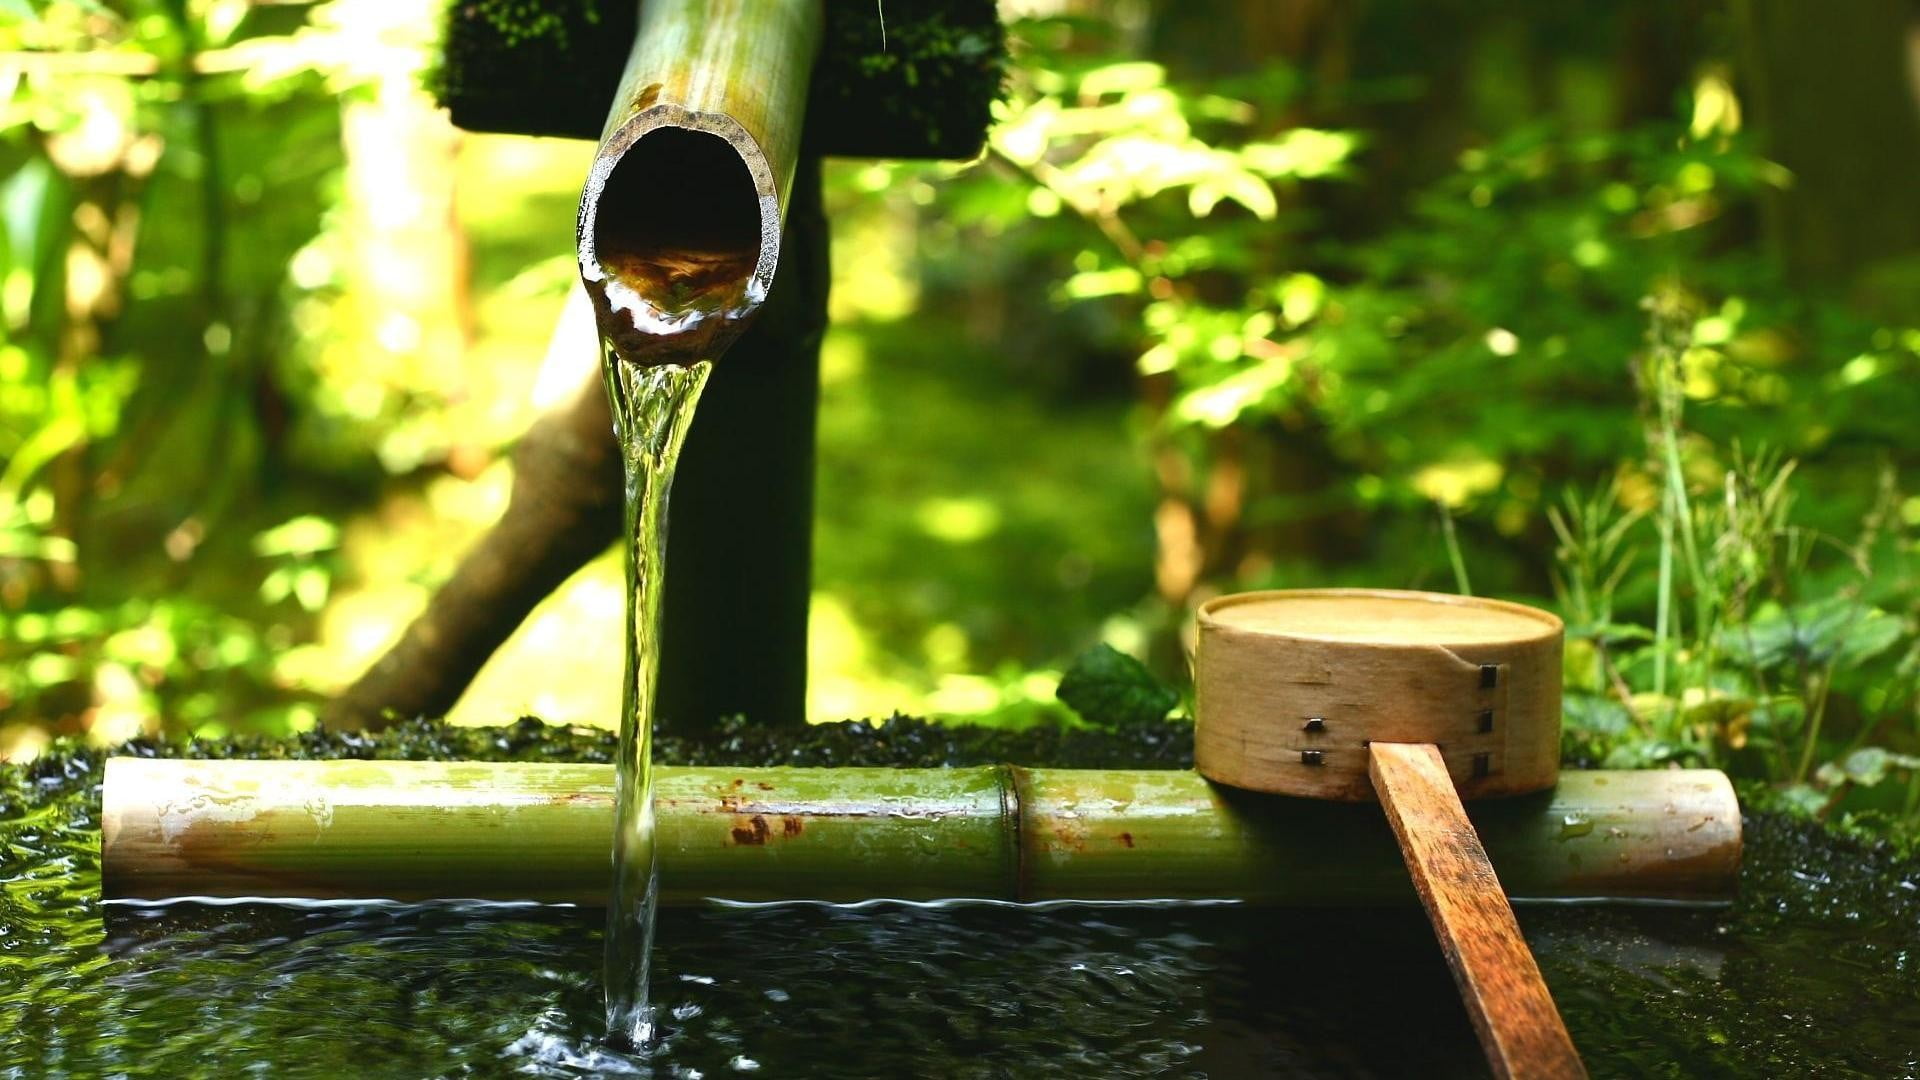 brown bamboo water fountain, plants, nature, wood - material